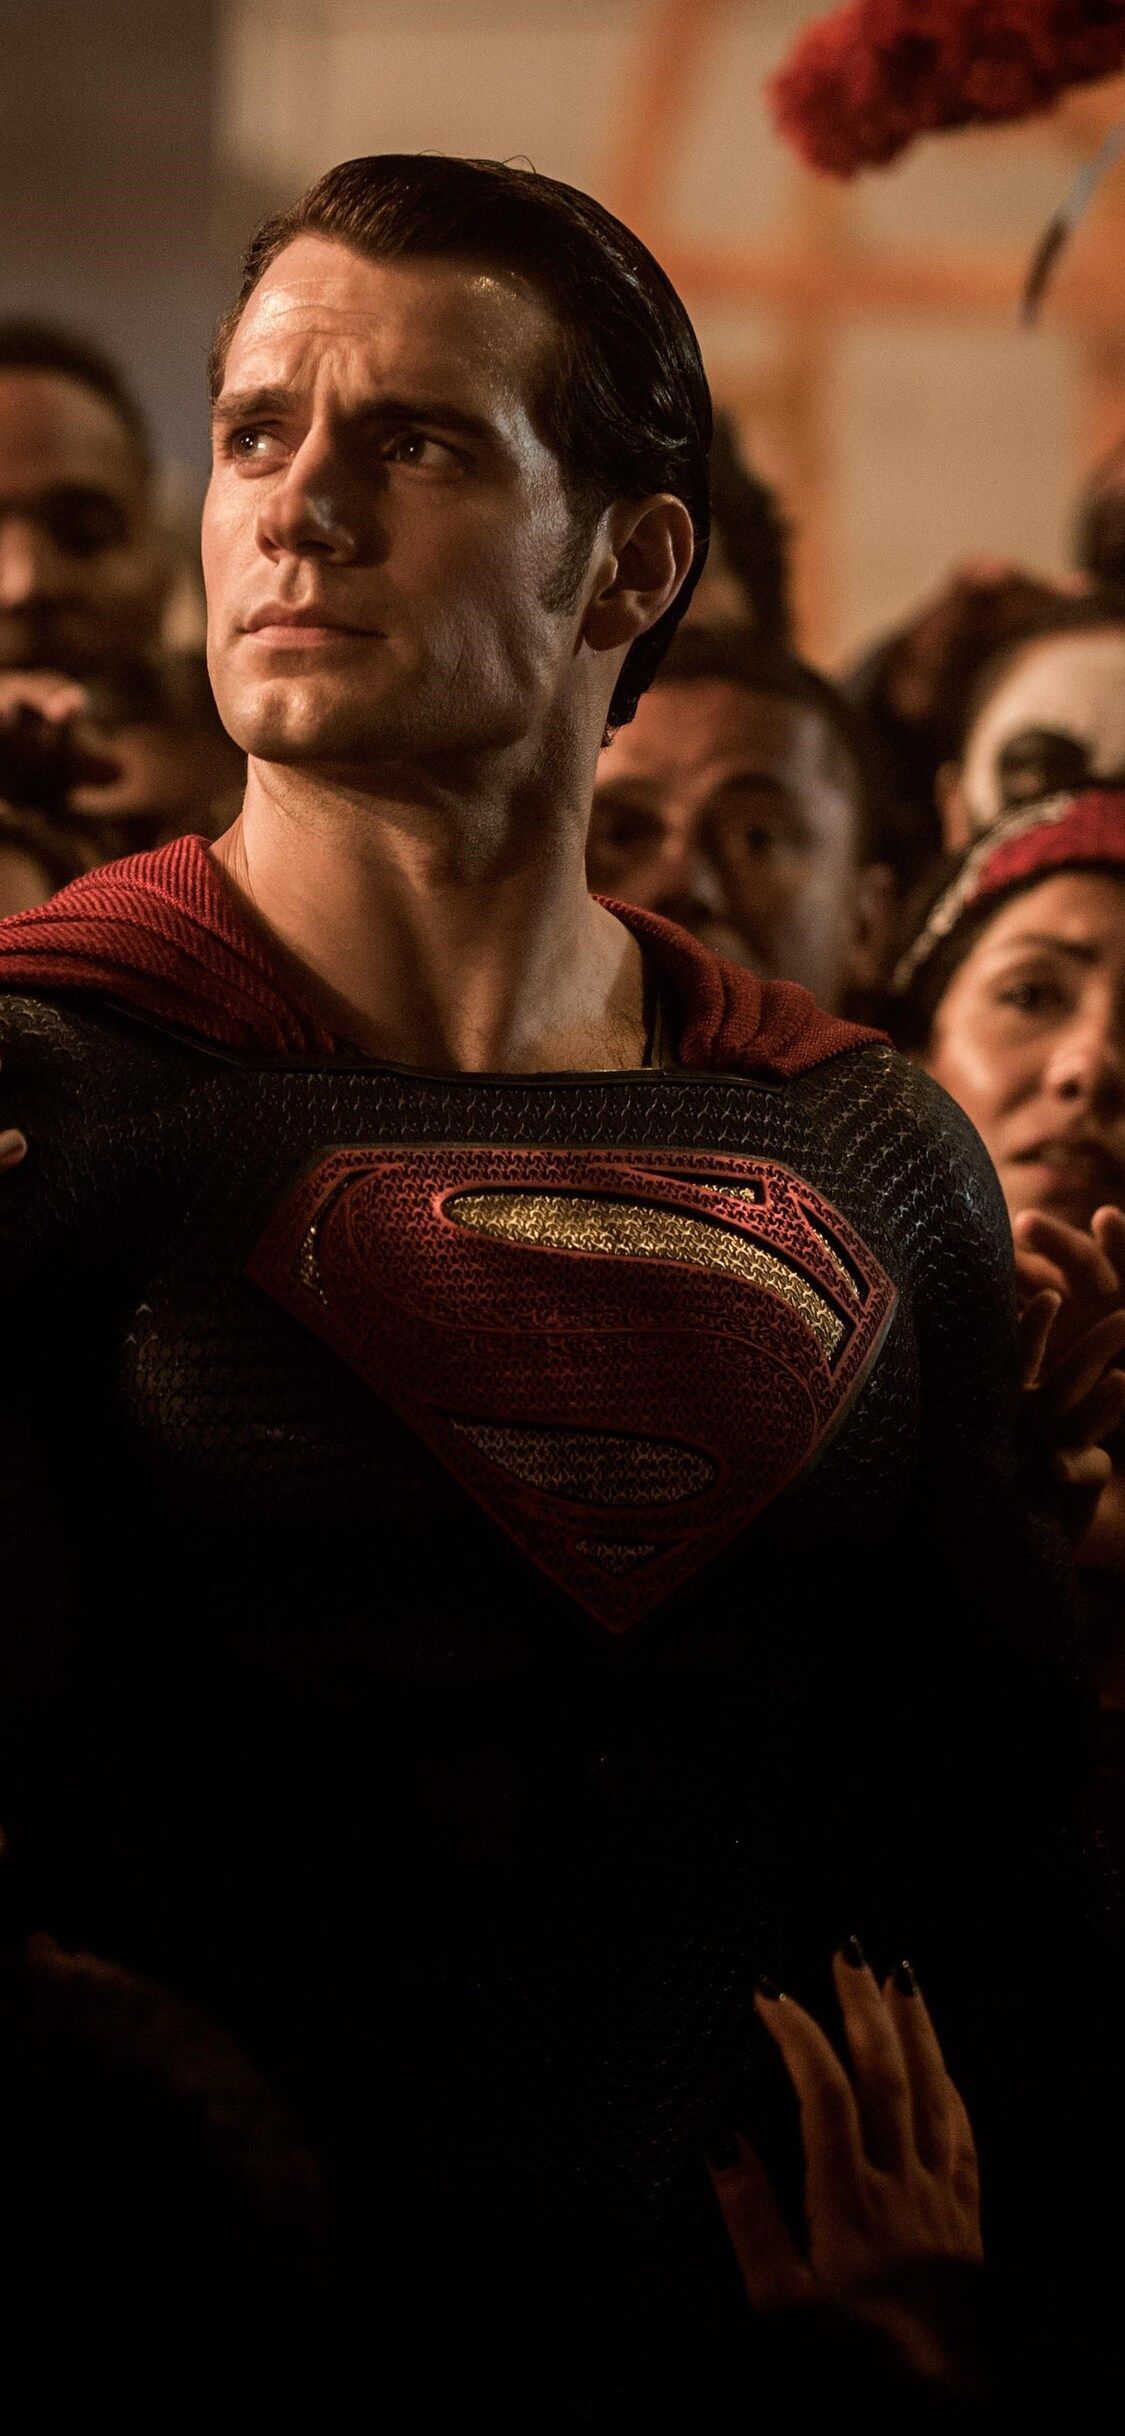 APPRECIATION: A few of my favorite wallpapers of Henry Cavill Superman!  Happy 10th Anniversary to Man Of Steel! : r/DC_Cinematic